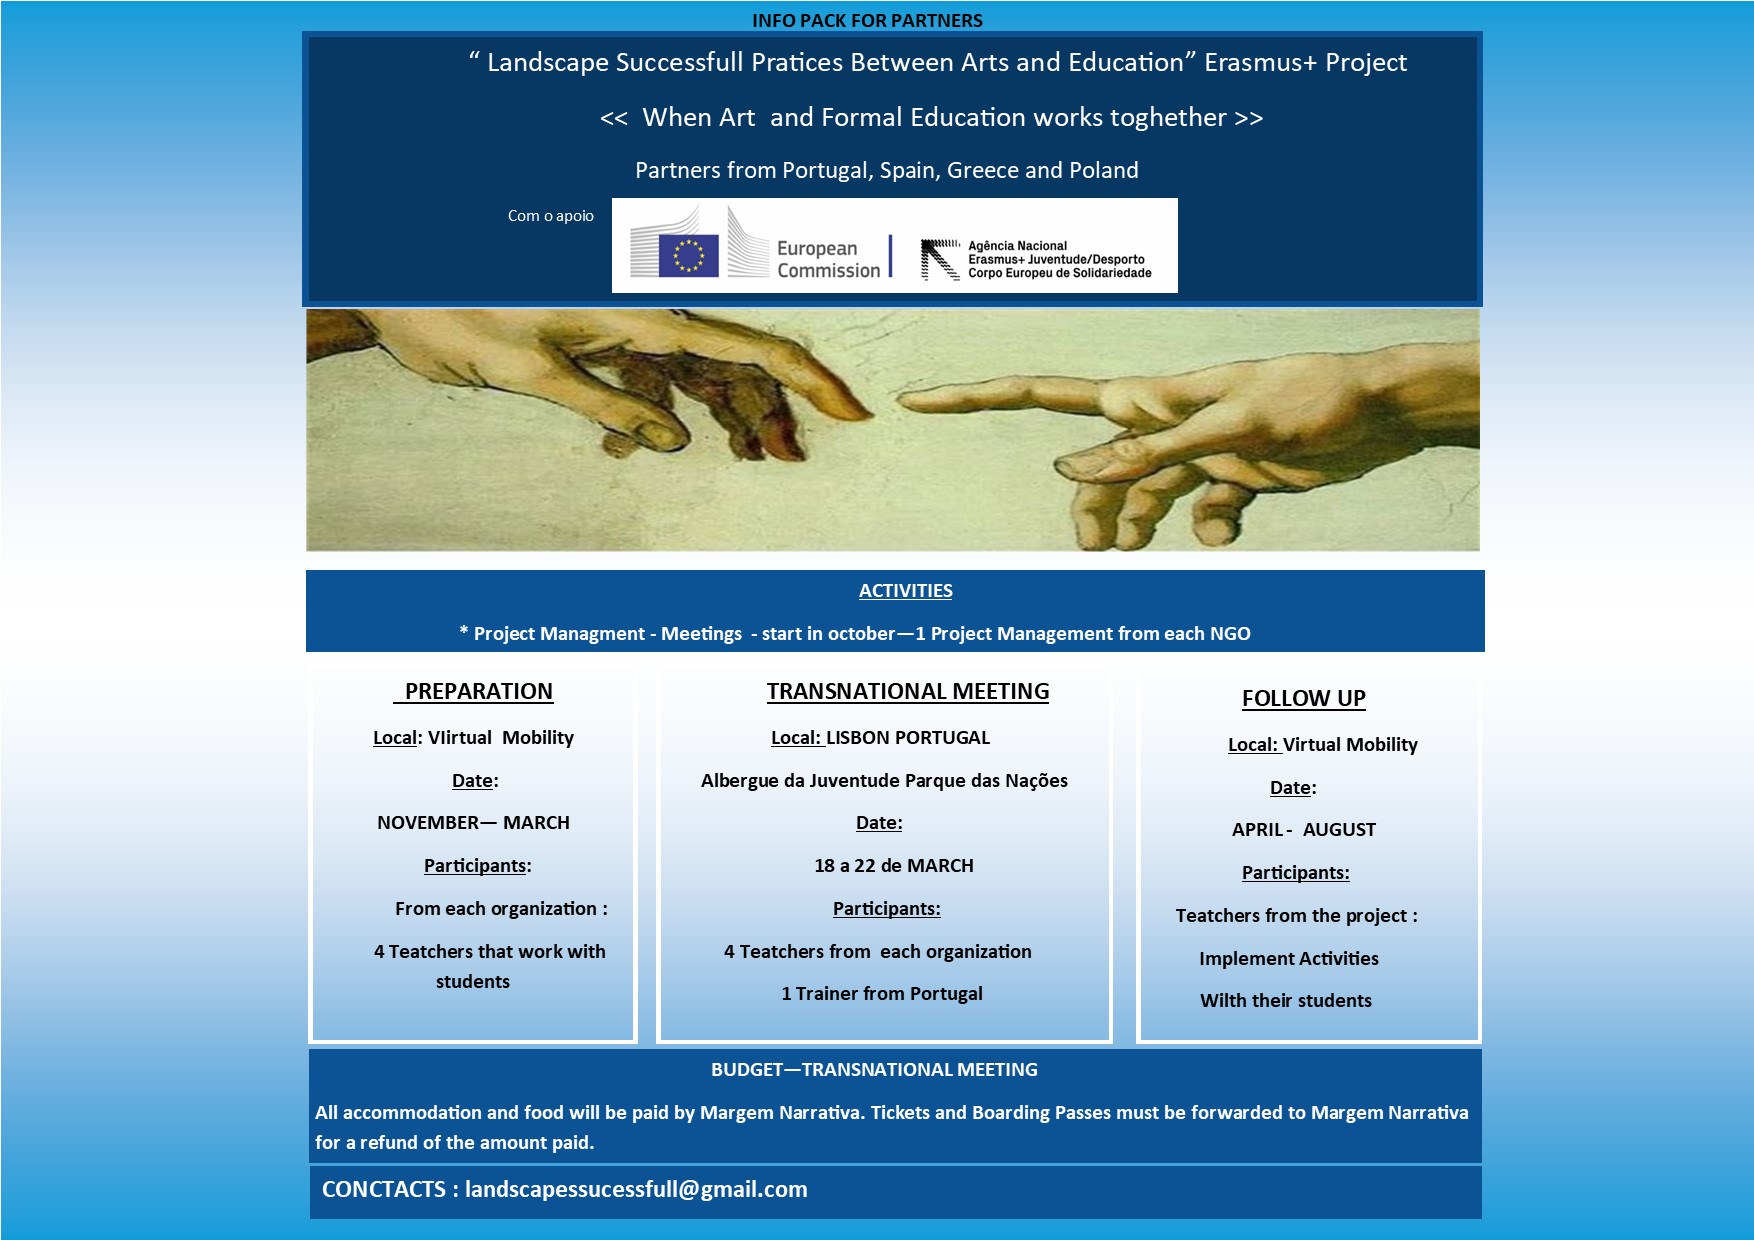 Projeto Erasmus “Landscapes Successful Practices Between Art and Education”